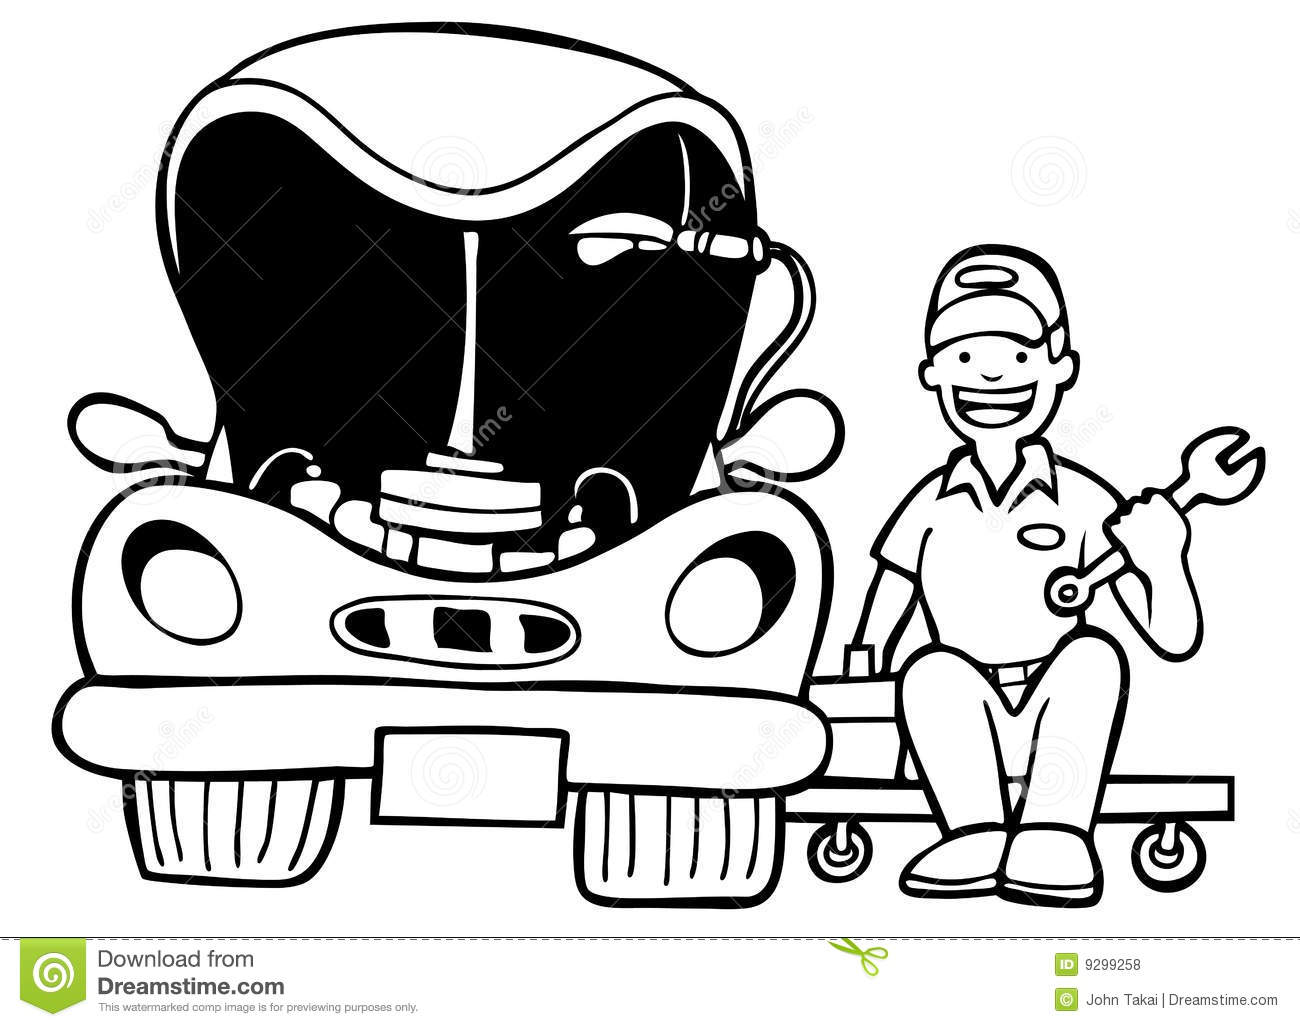 Clipart car black and white mechanic 